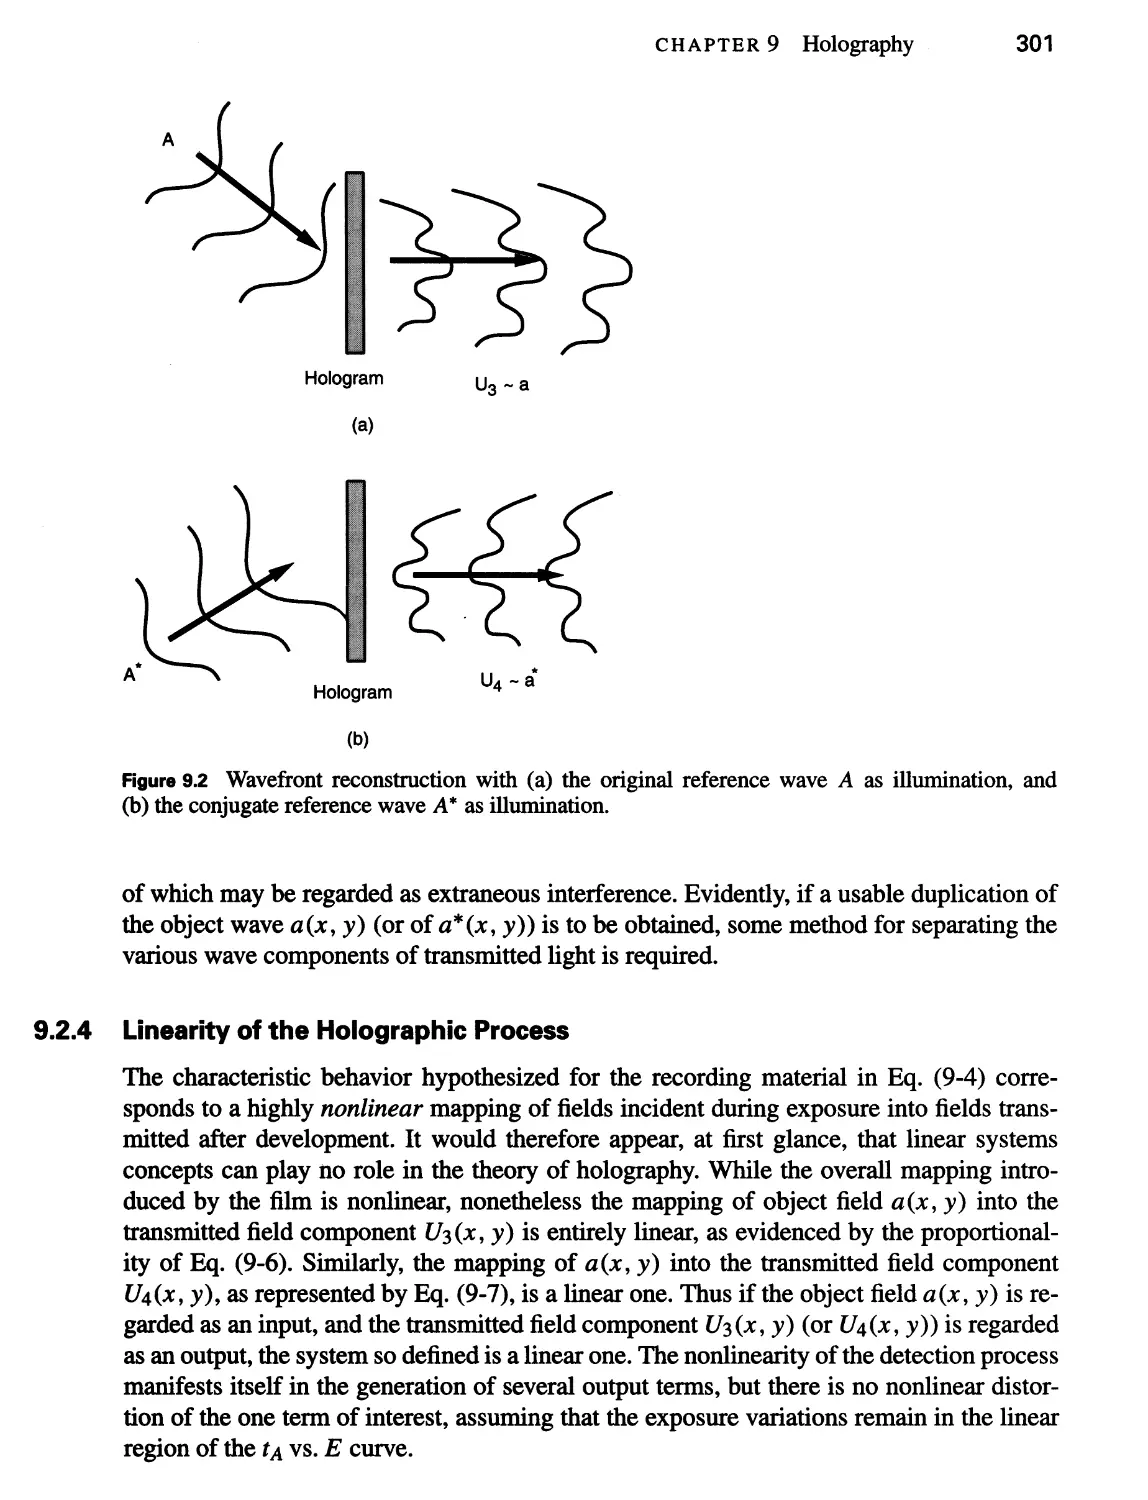 9.2.4 Linearity of the Holographic Process 301